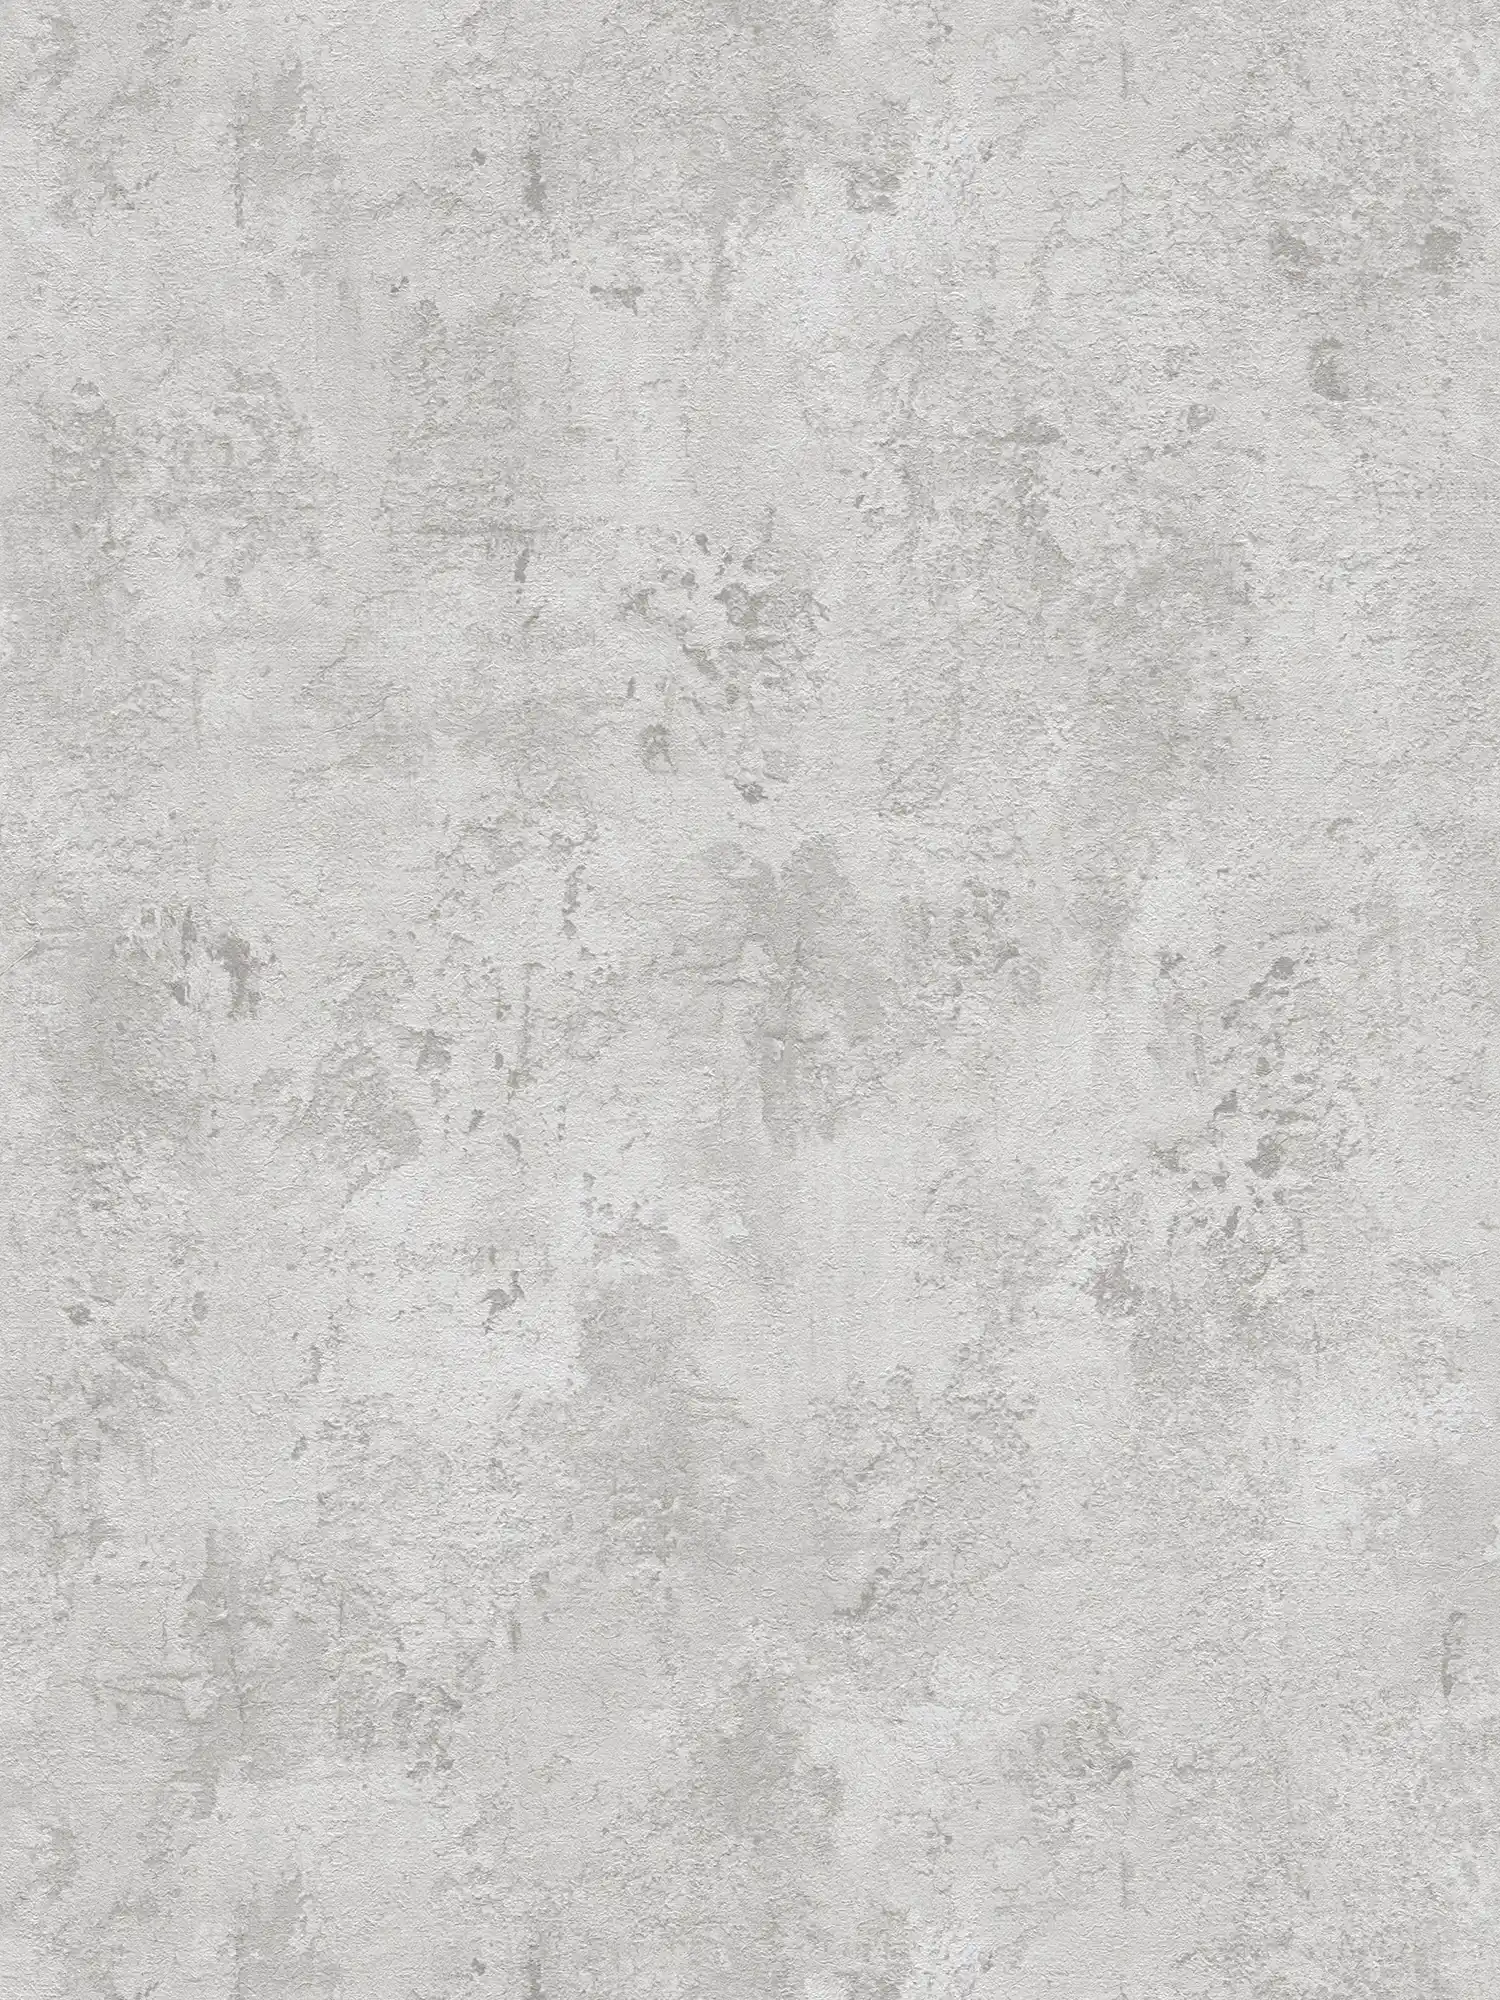 Grey concrete look wallpaper with used look - grey
